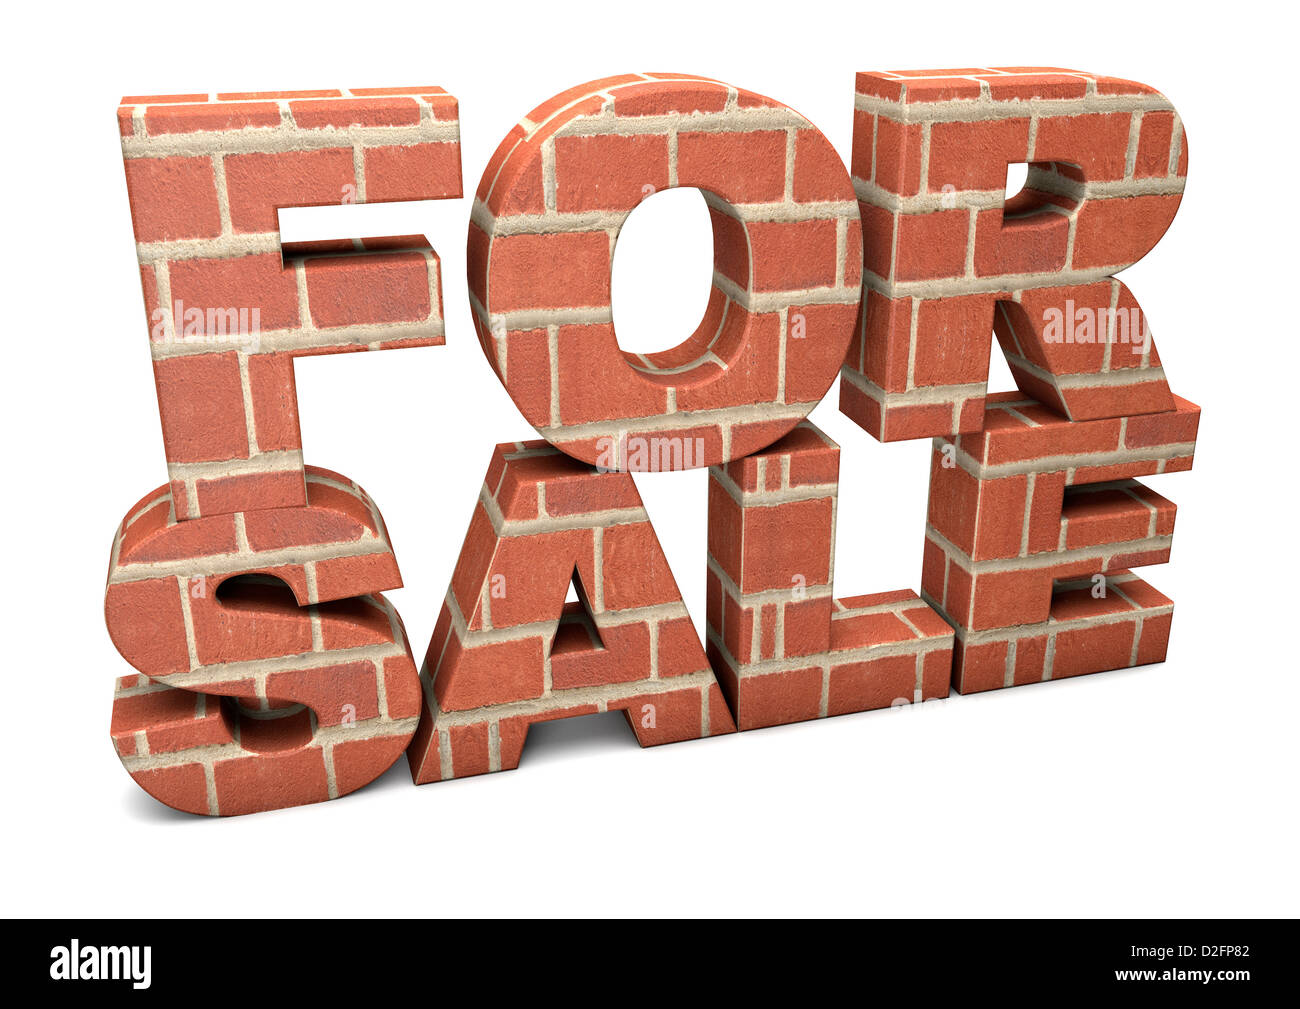 FOR SALE - made from bricks isolated on a white background. Stock Photo